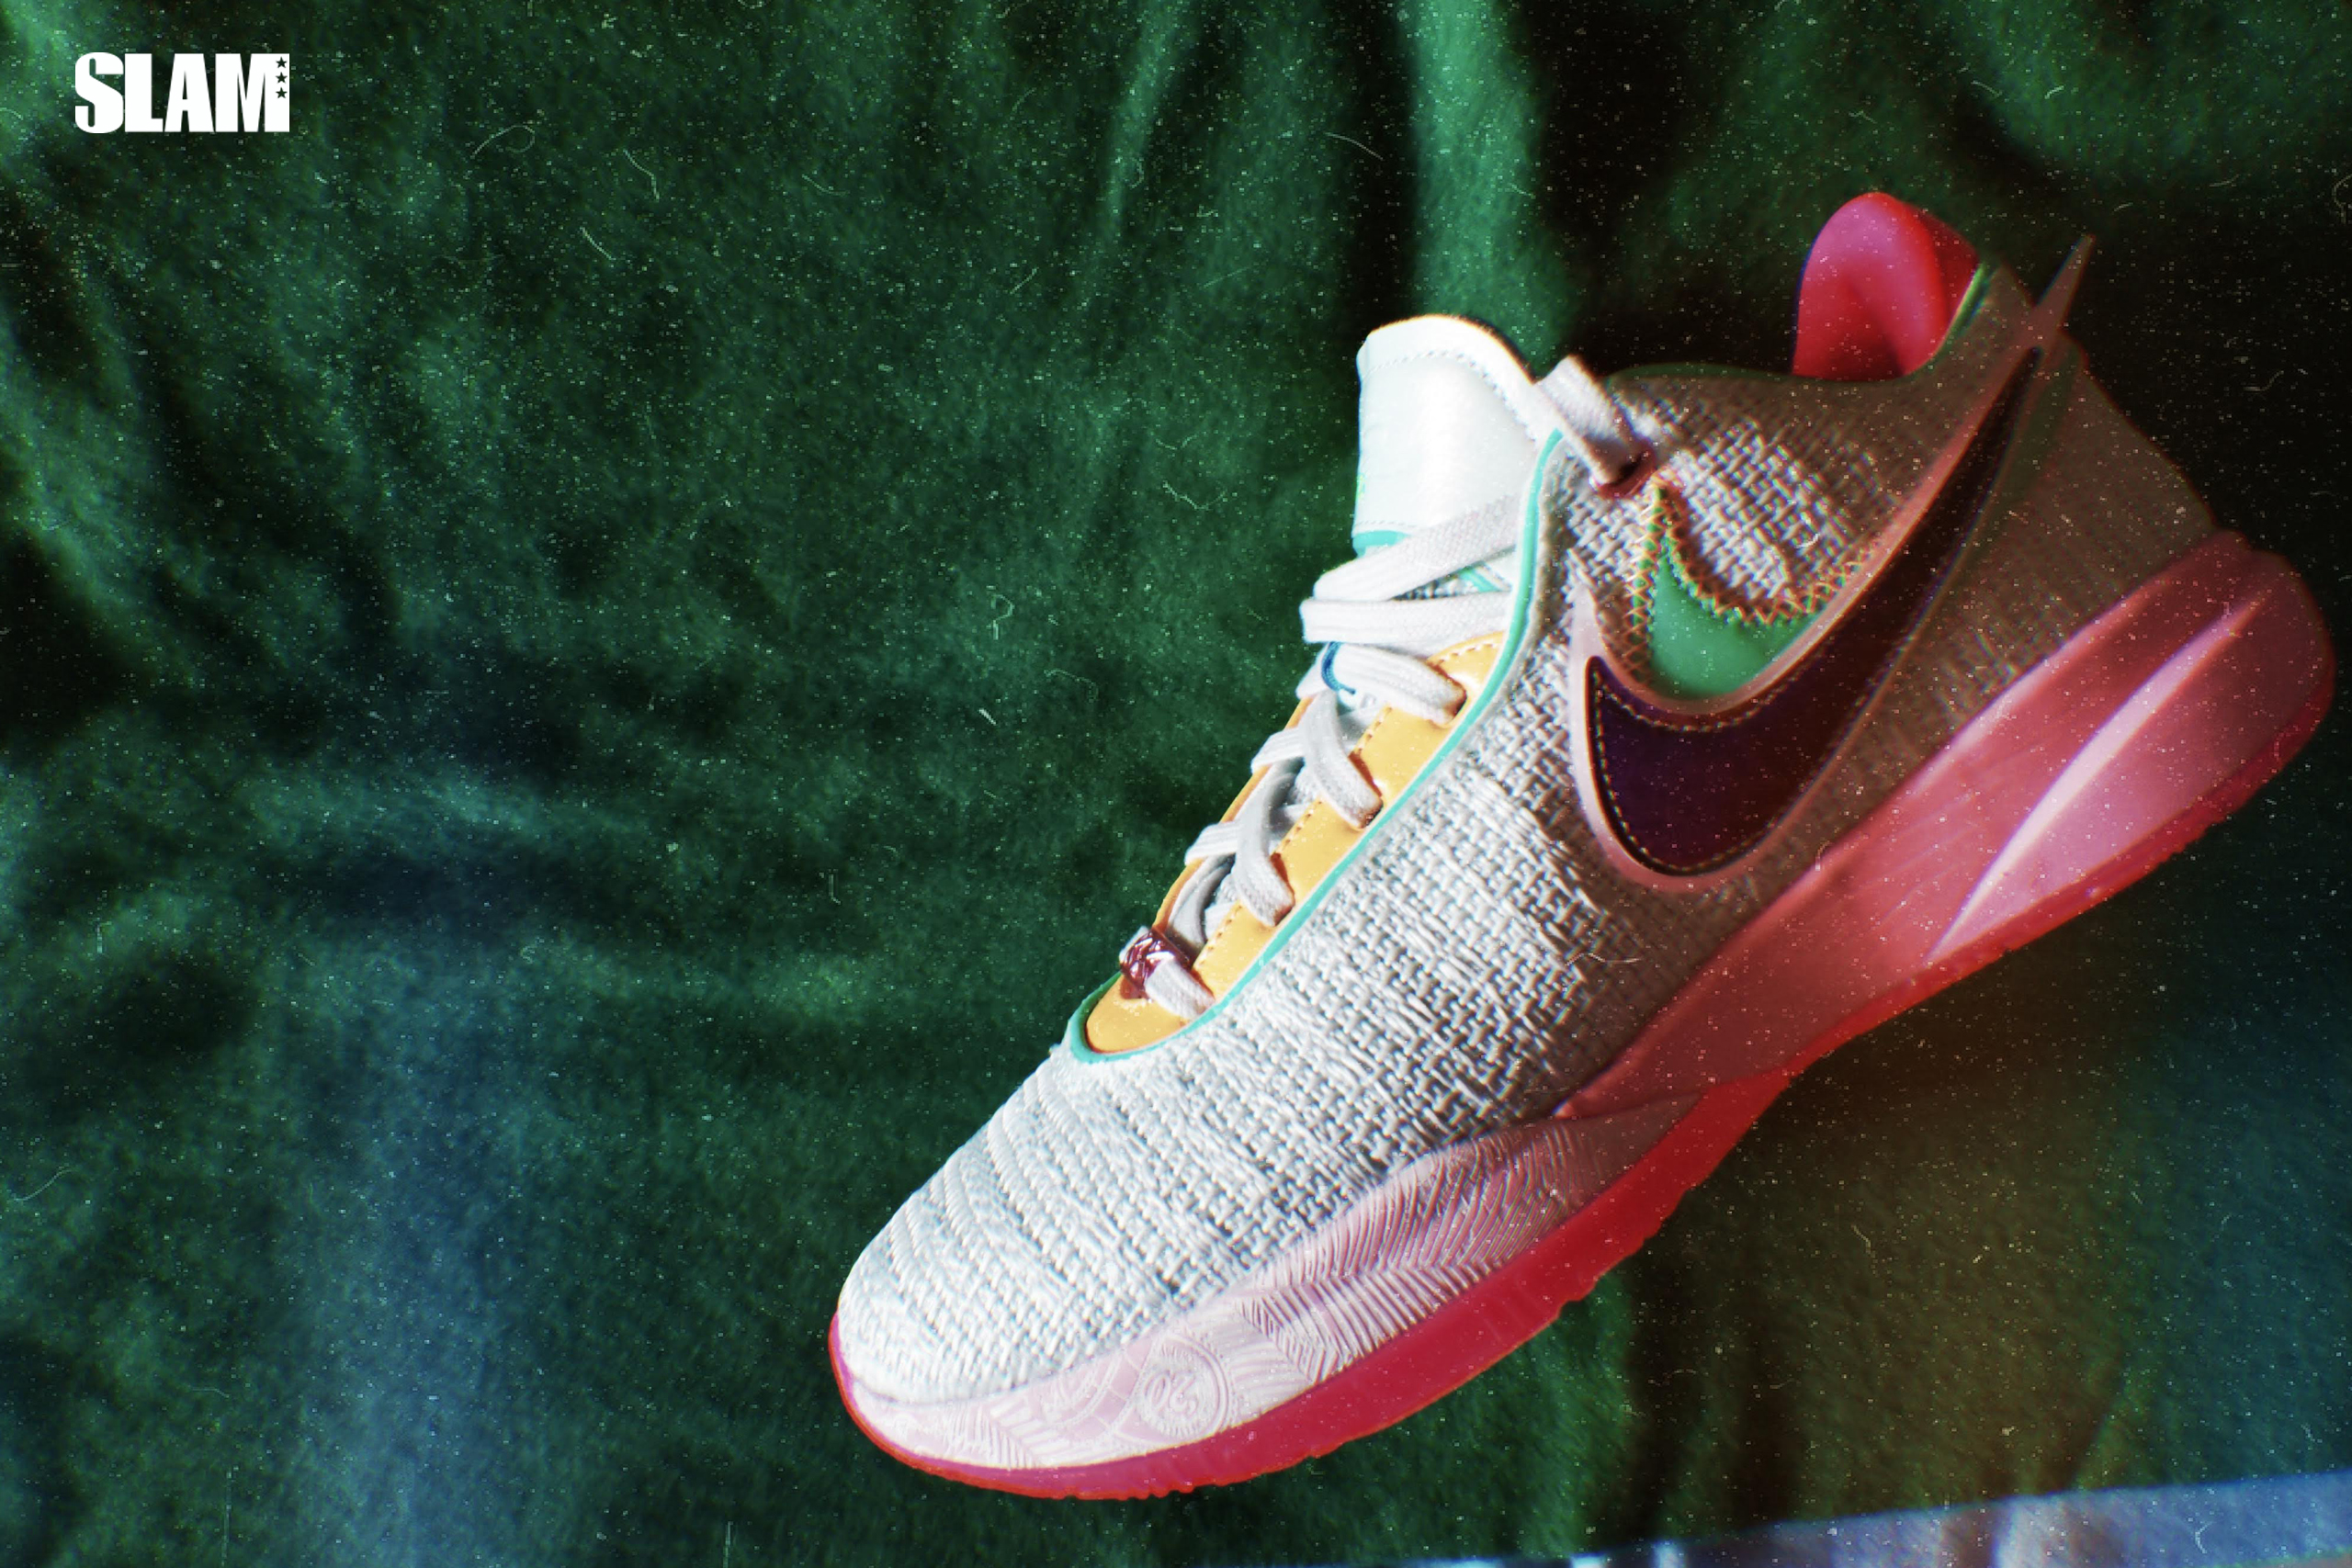 The Nike LeBron 20 Appears With An All-Pink Upper - Sneaker News